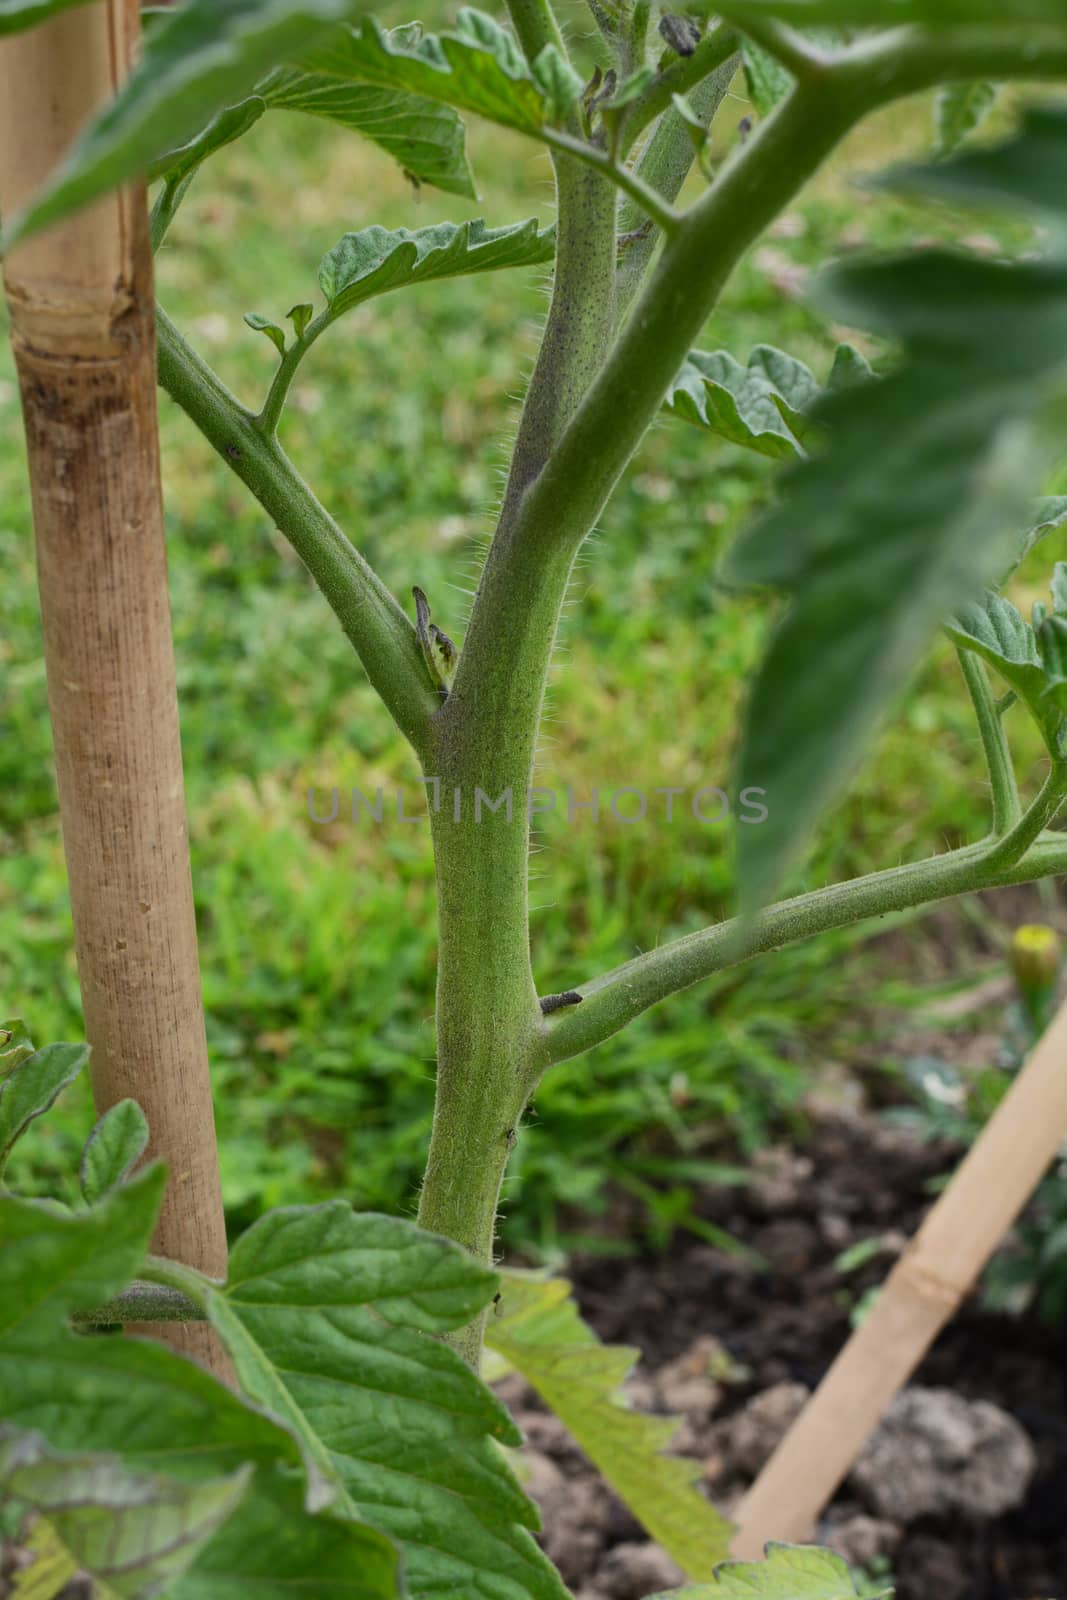 Small side shoot growing on a tomato plant between trusses of an indeterminate cordon plant. Sideshoots should be pinched out to encourage bushy growth.